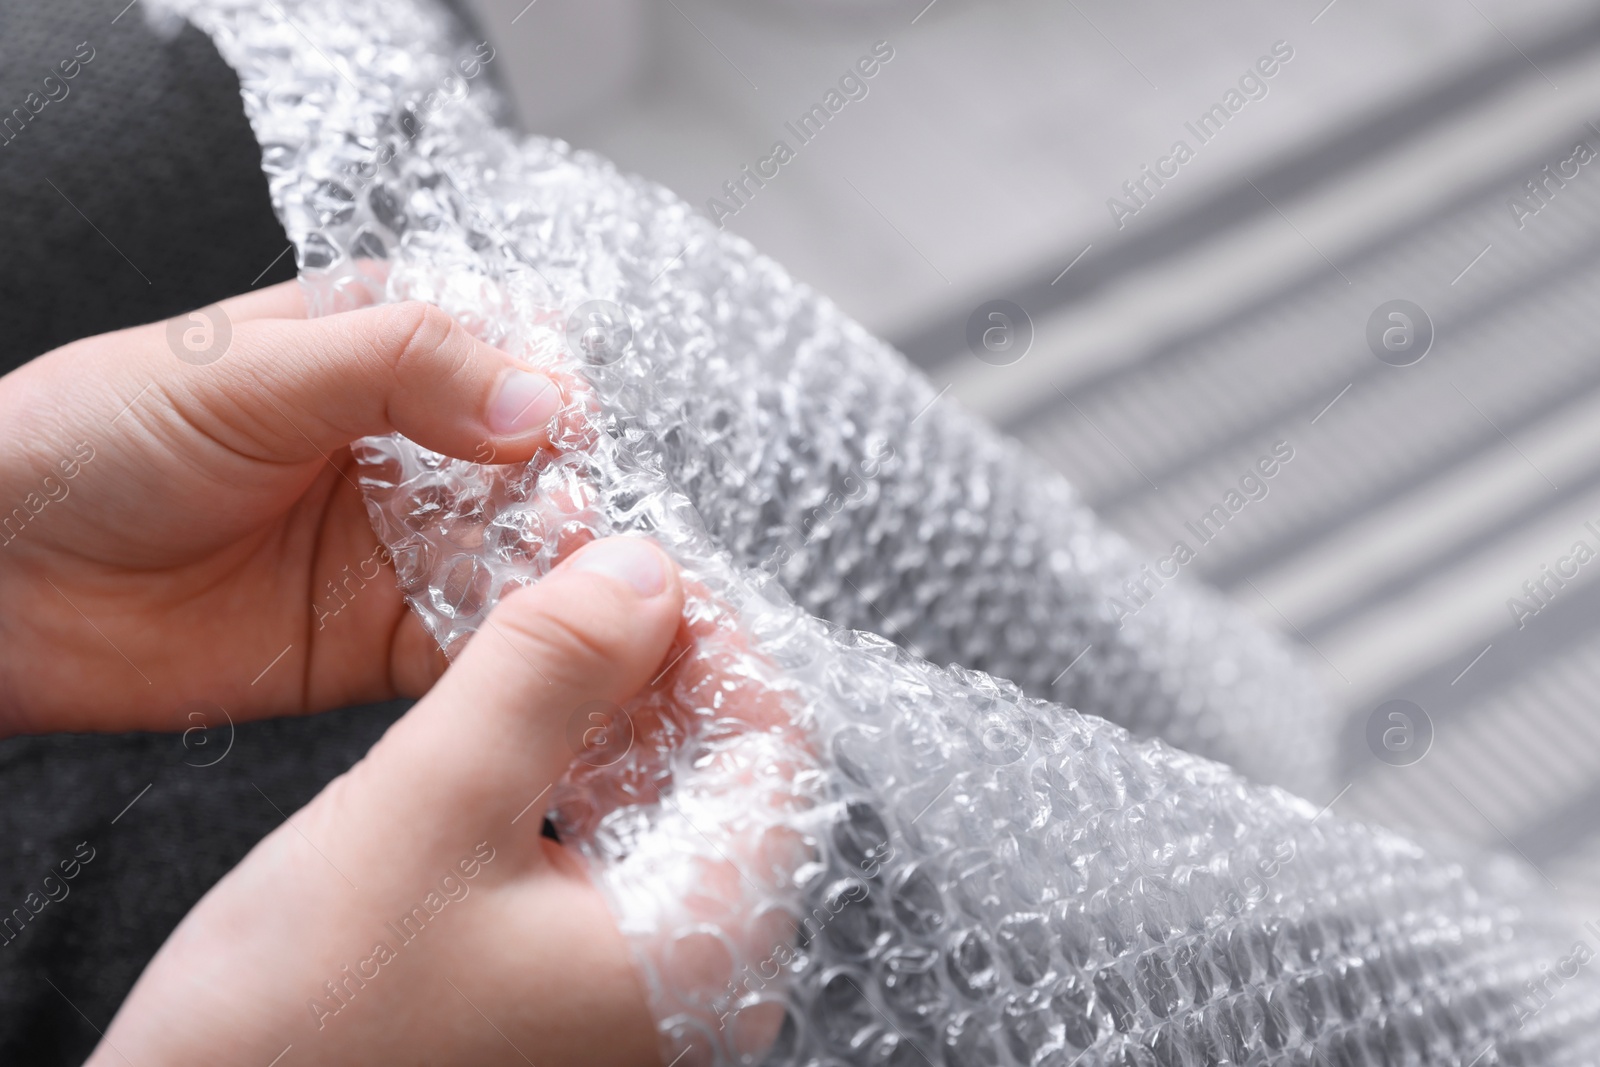 Photo of Boy popping bubble wrap, closeup. Stress relief